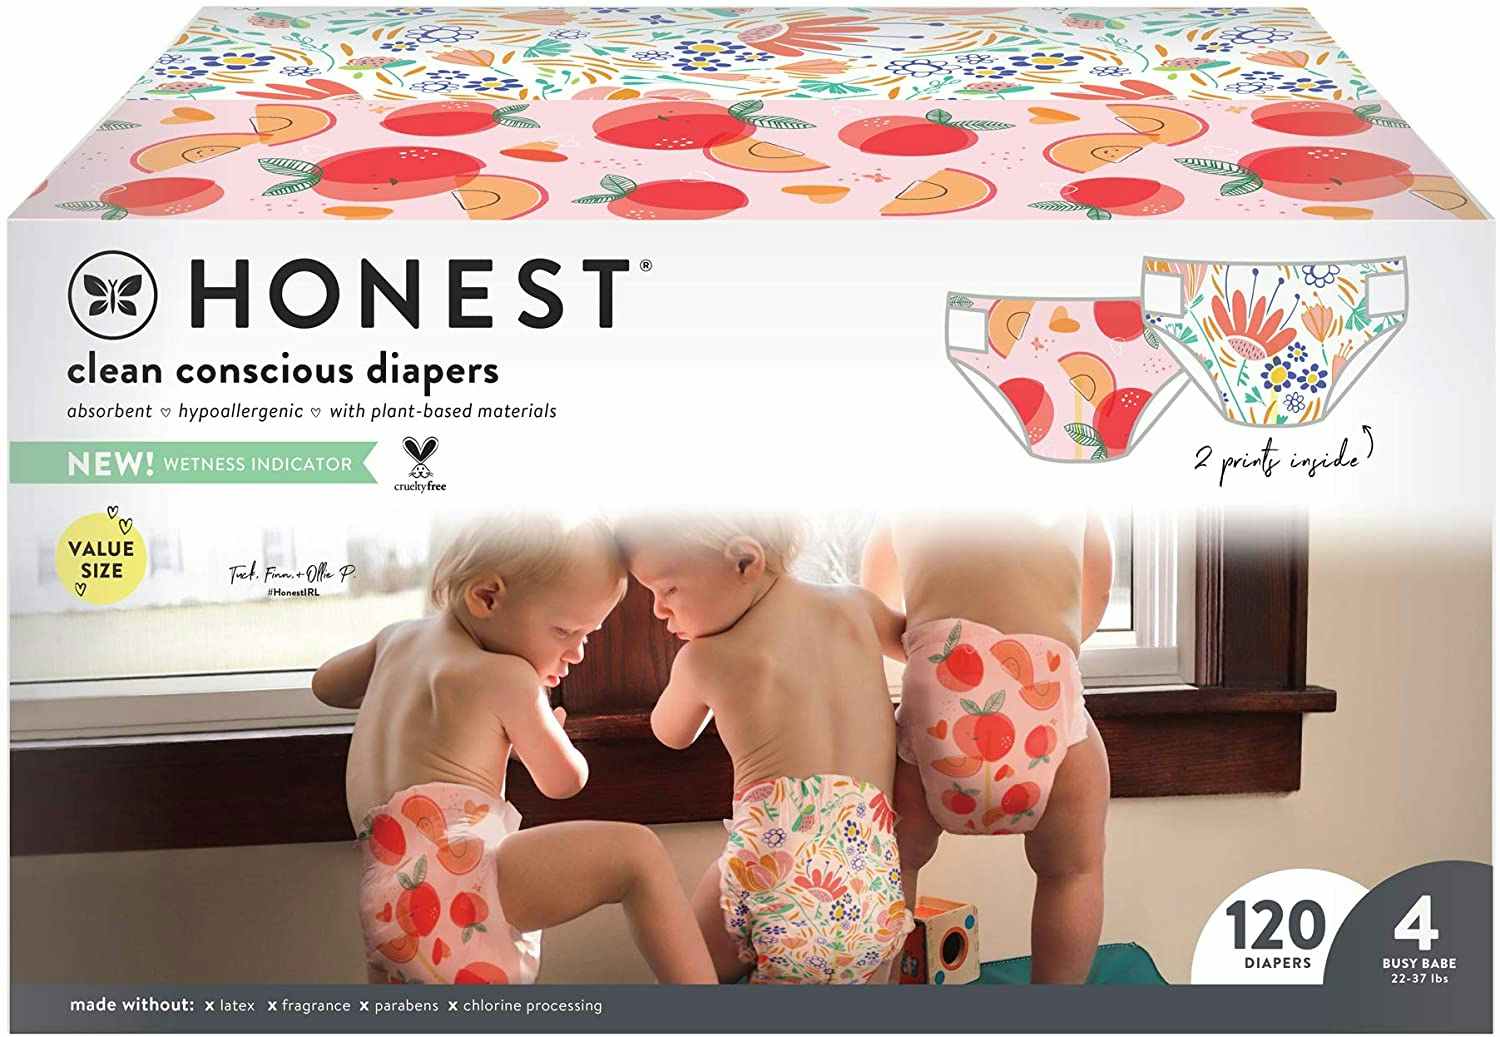 A box of The Honest Company size 4 diapers